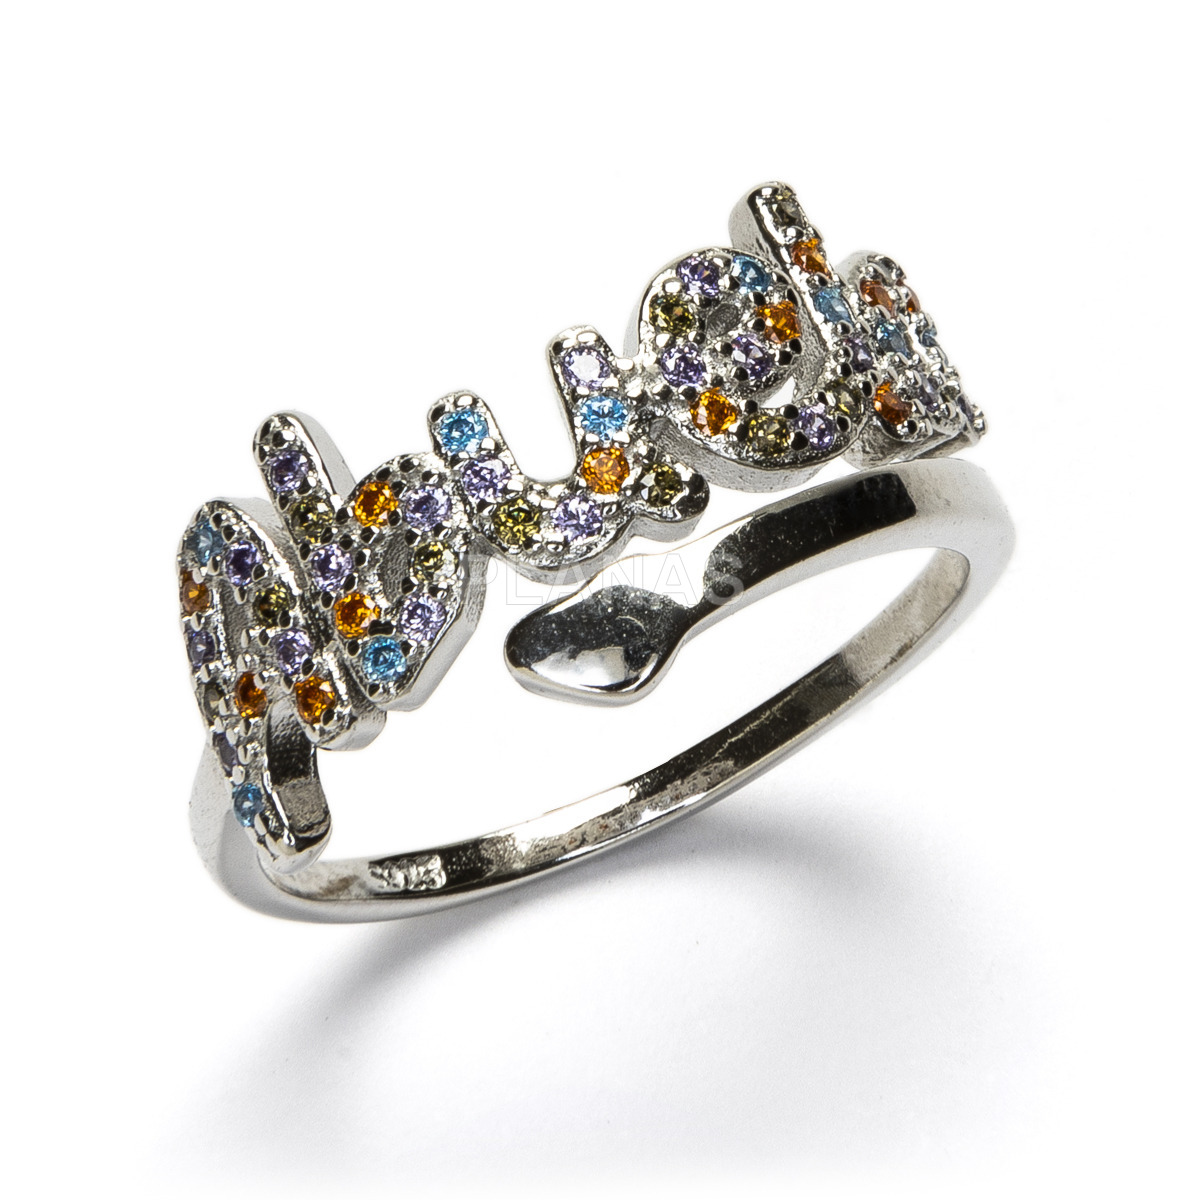 Ring in rhodium-plated sterling silver and colored zircons. grandmother.